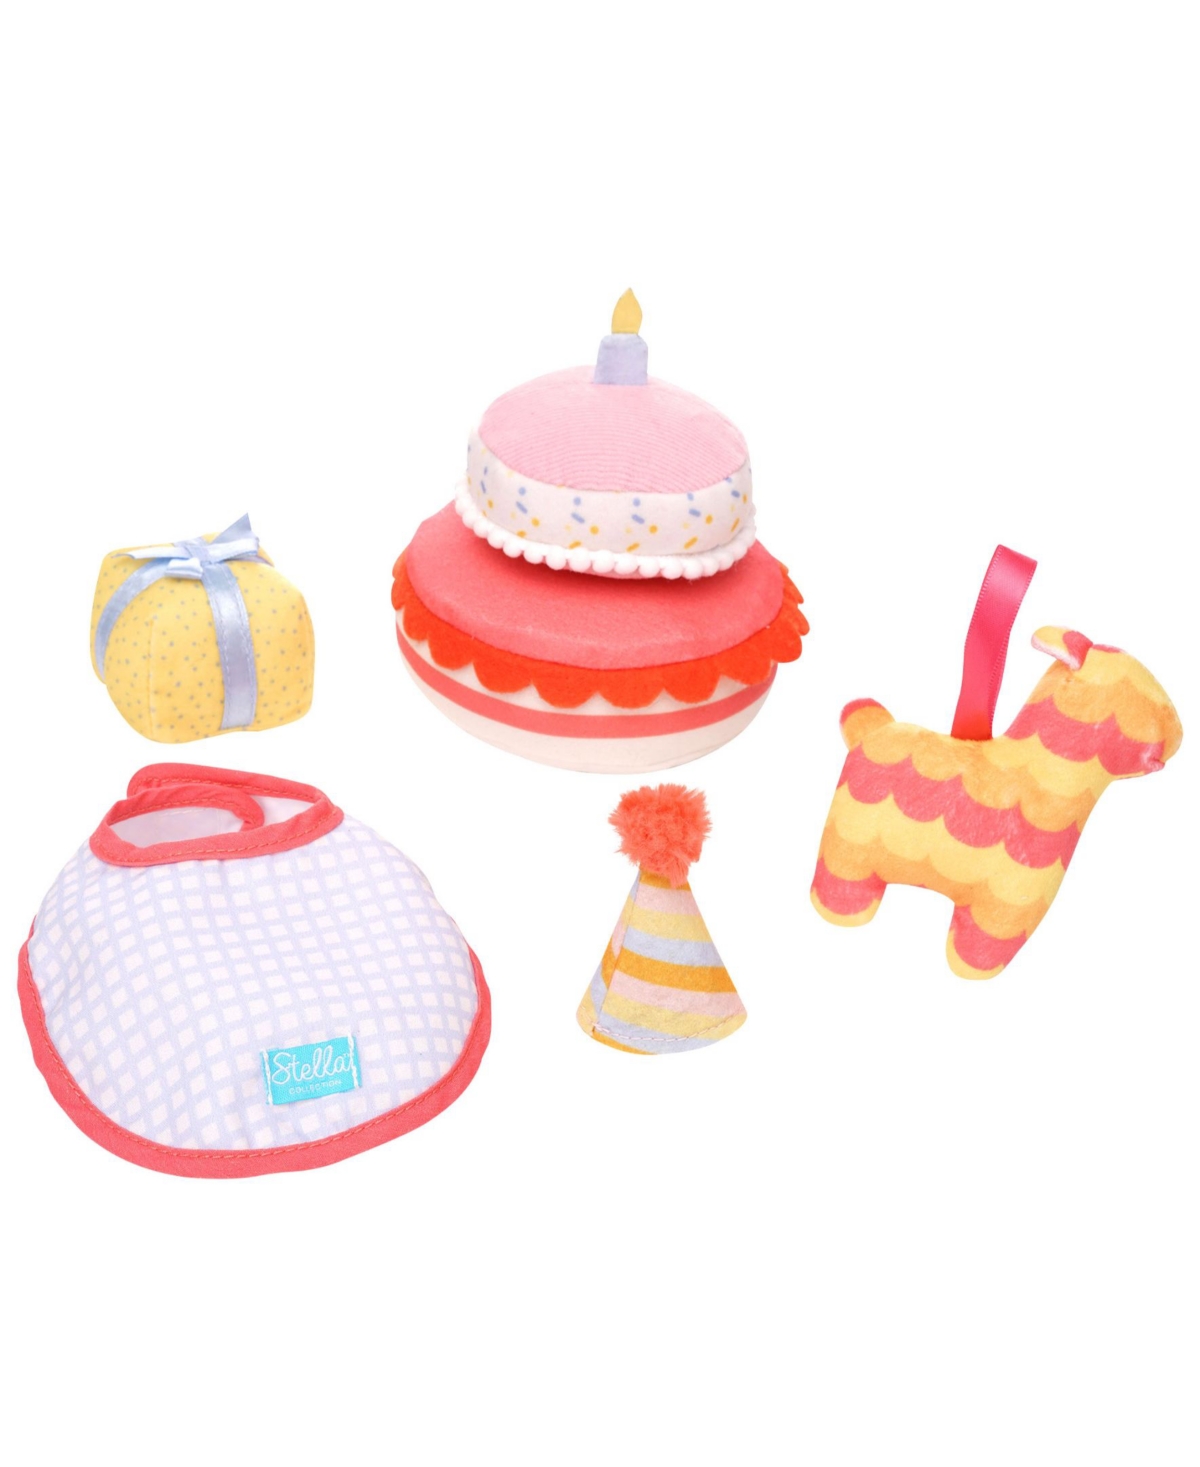 Manhattan Toy Company Stella Collection Birthday Party Set, 5 Piece In Multi